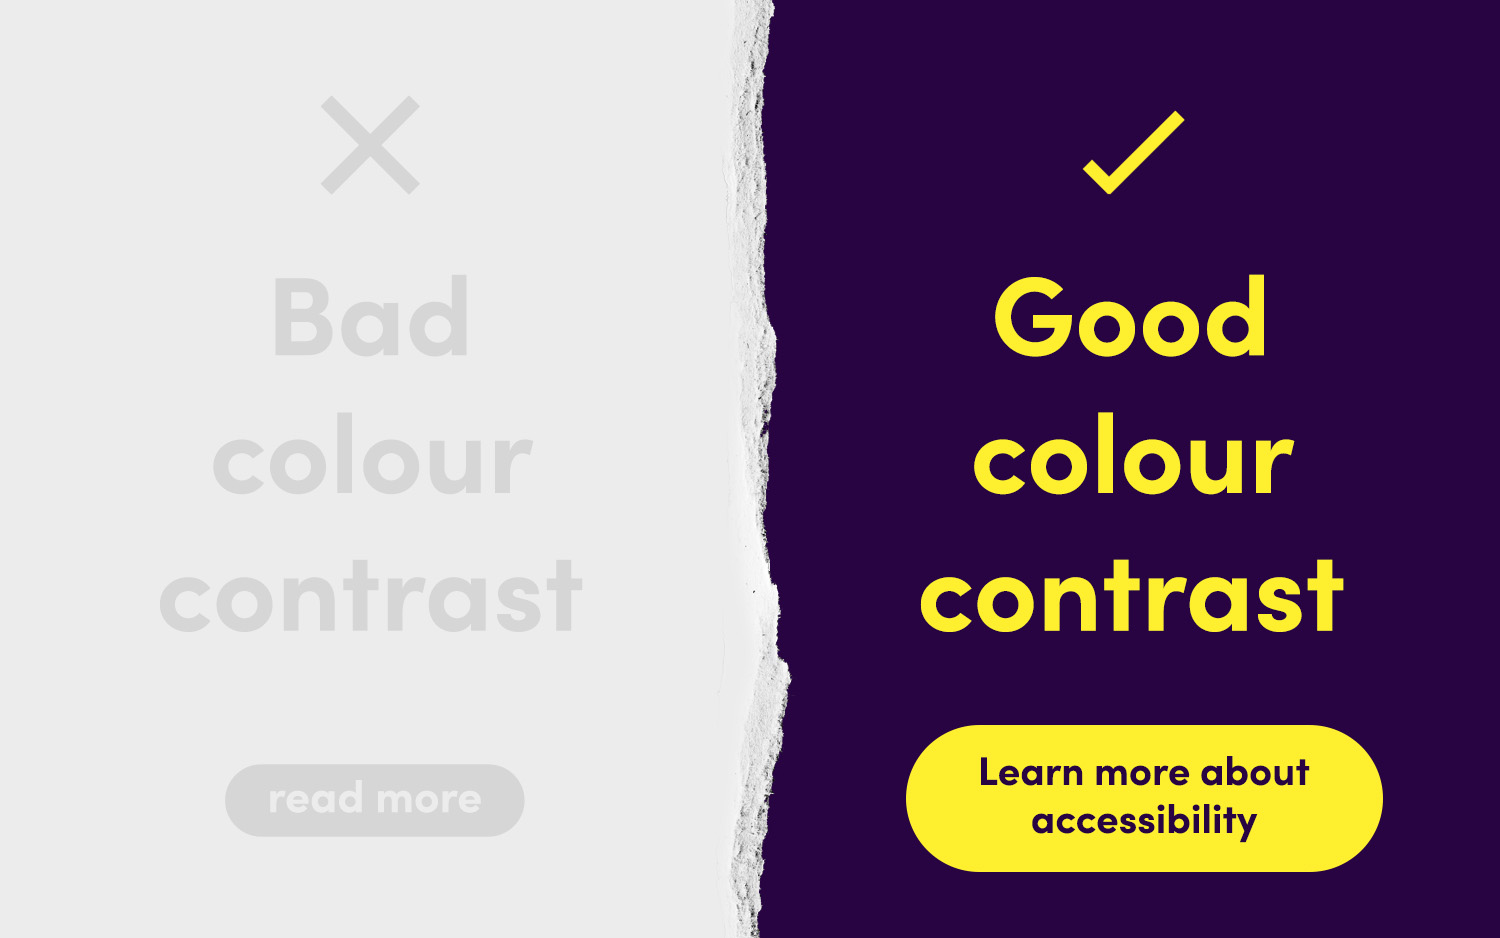 showing the difference between contrasts for digital design